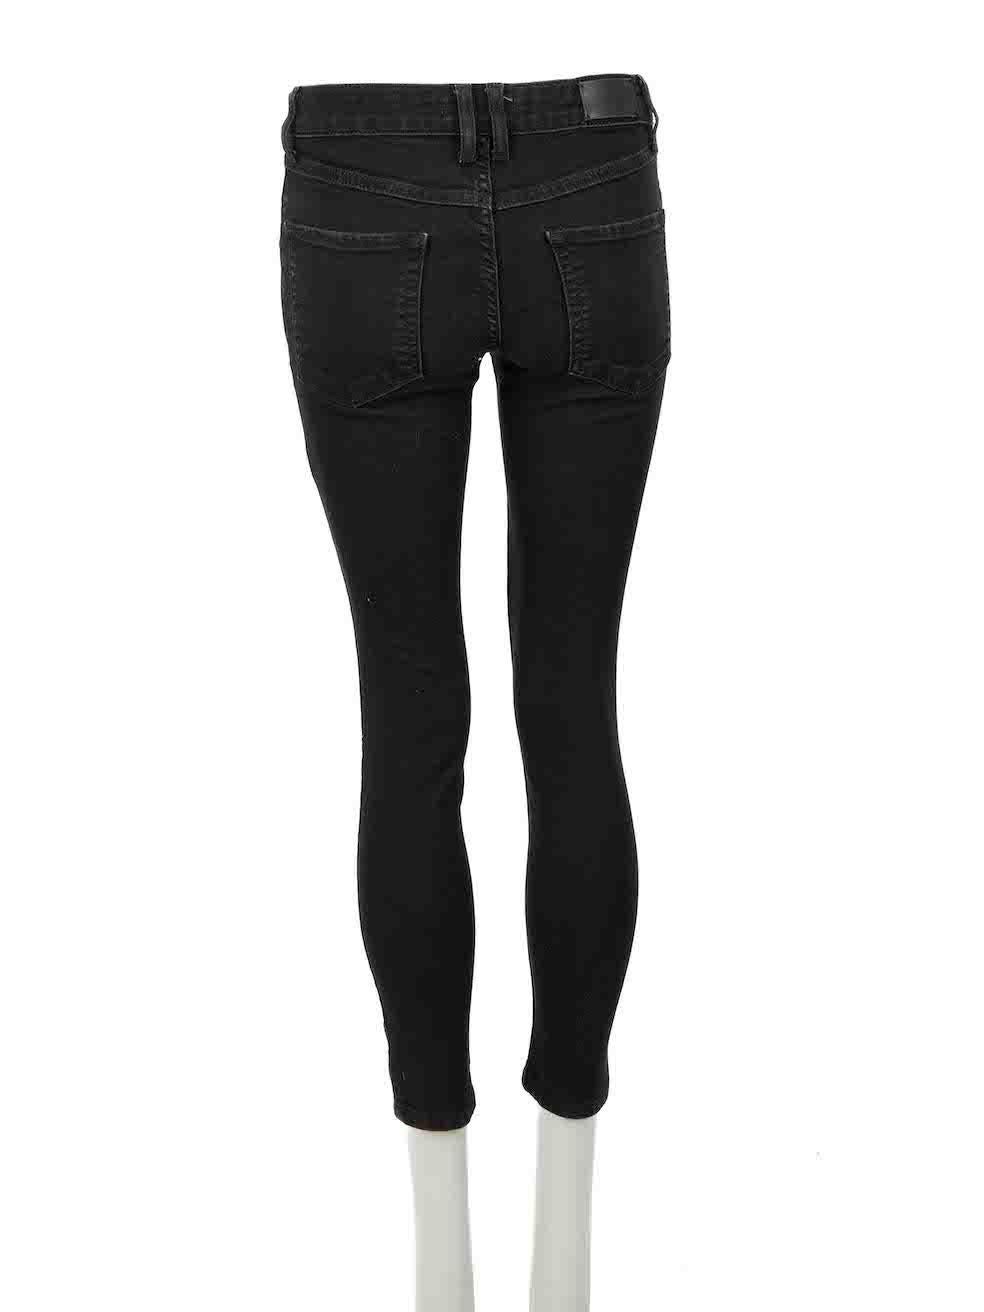 Sandro Black Skinny Jeans Size S In Excellent Condition For Sale In London, GB